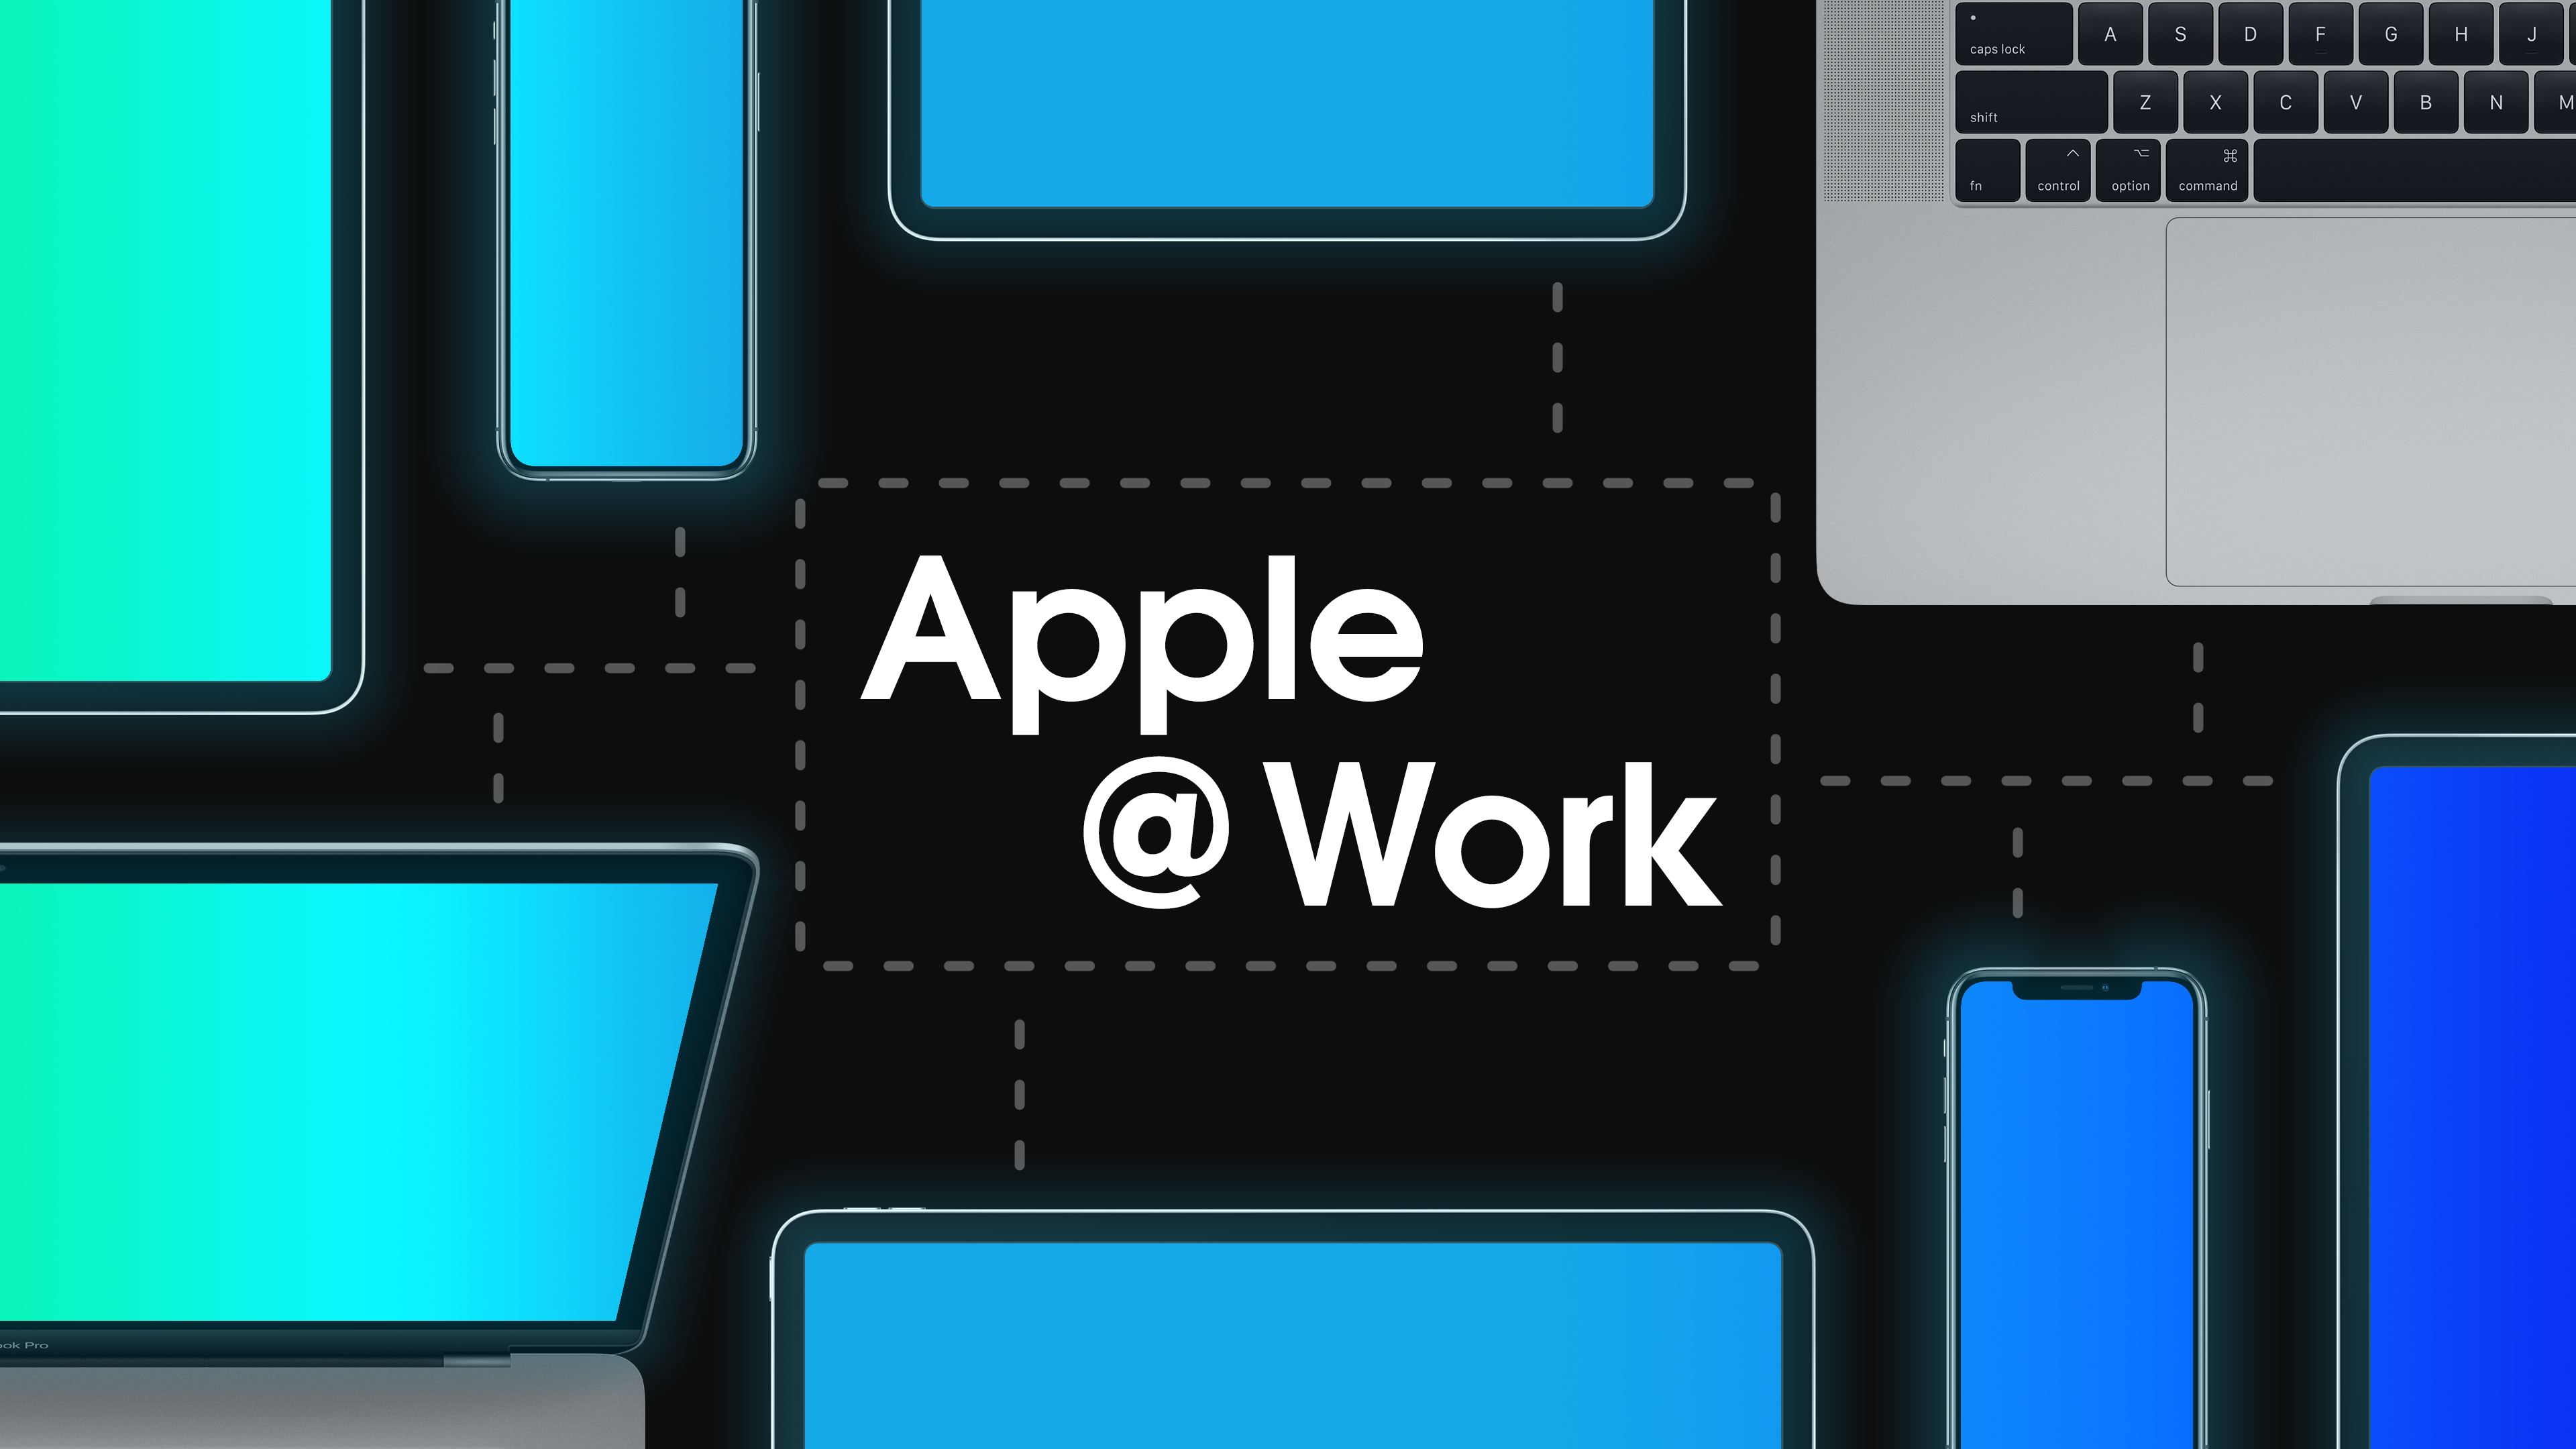 Deep Work download the last version for apple